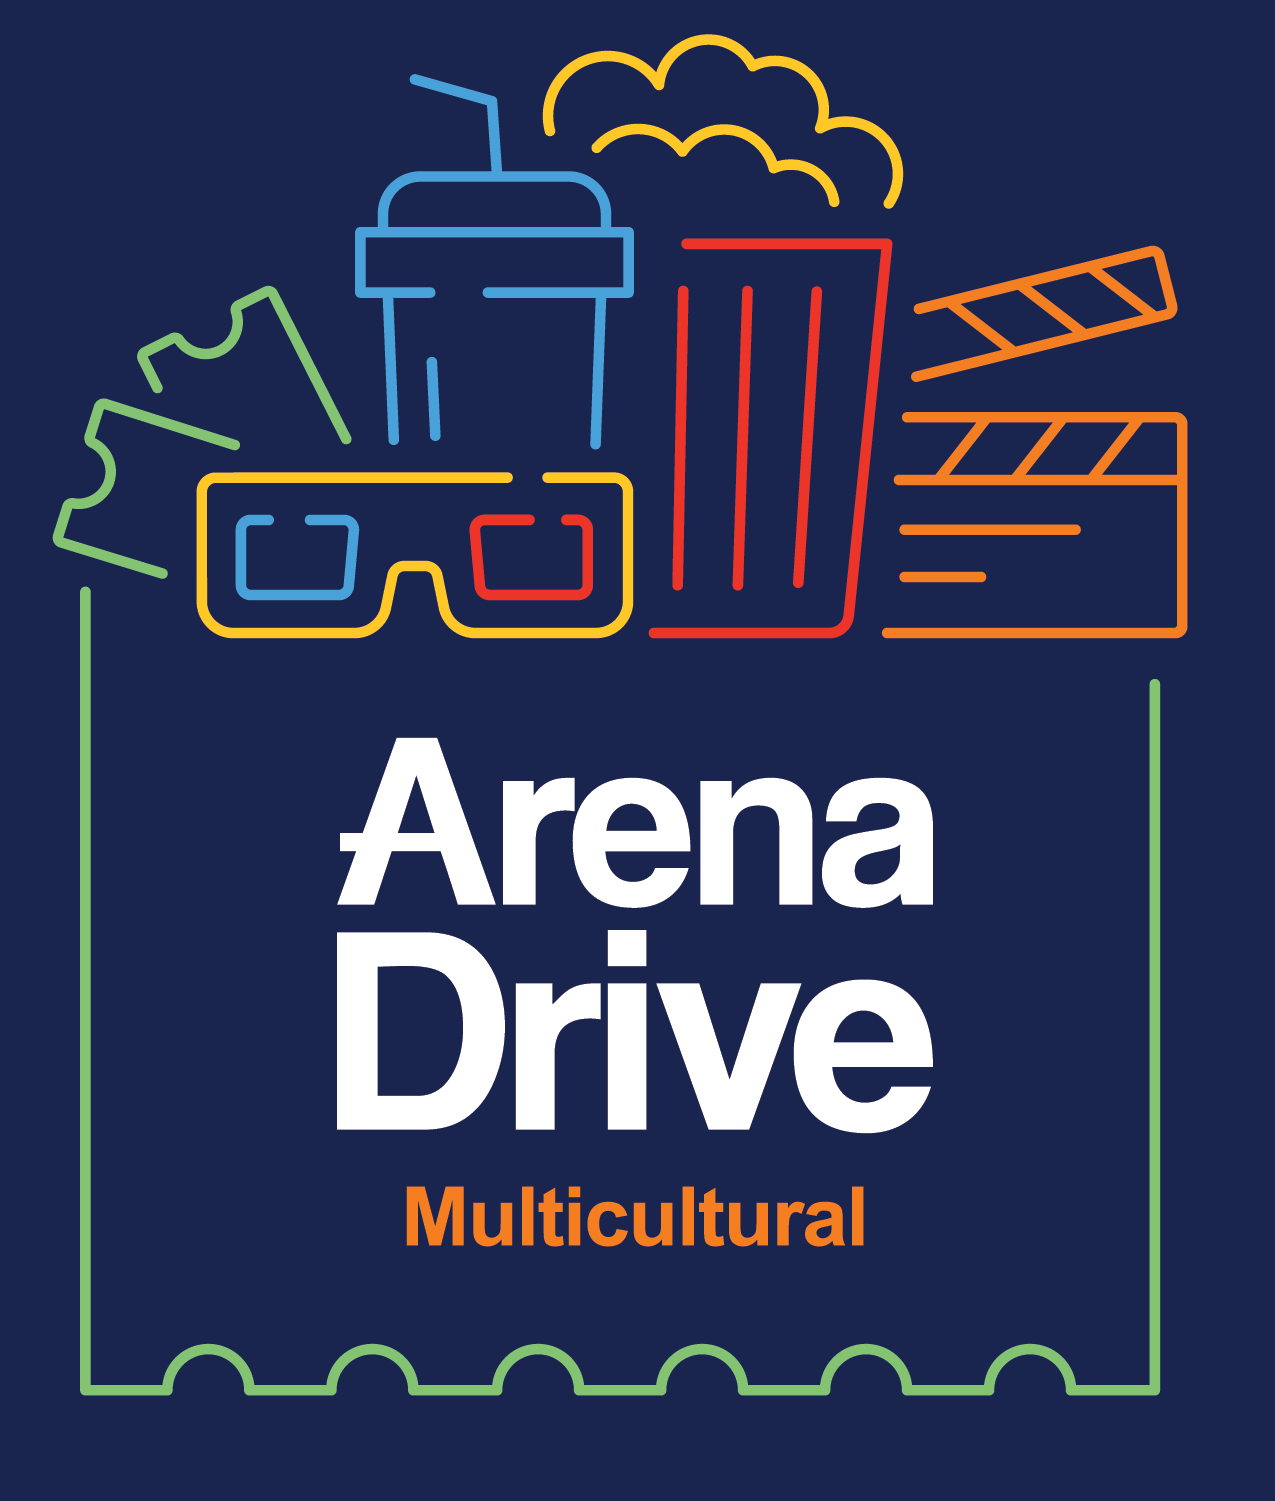 Arena Drive Multicultural